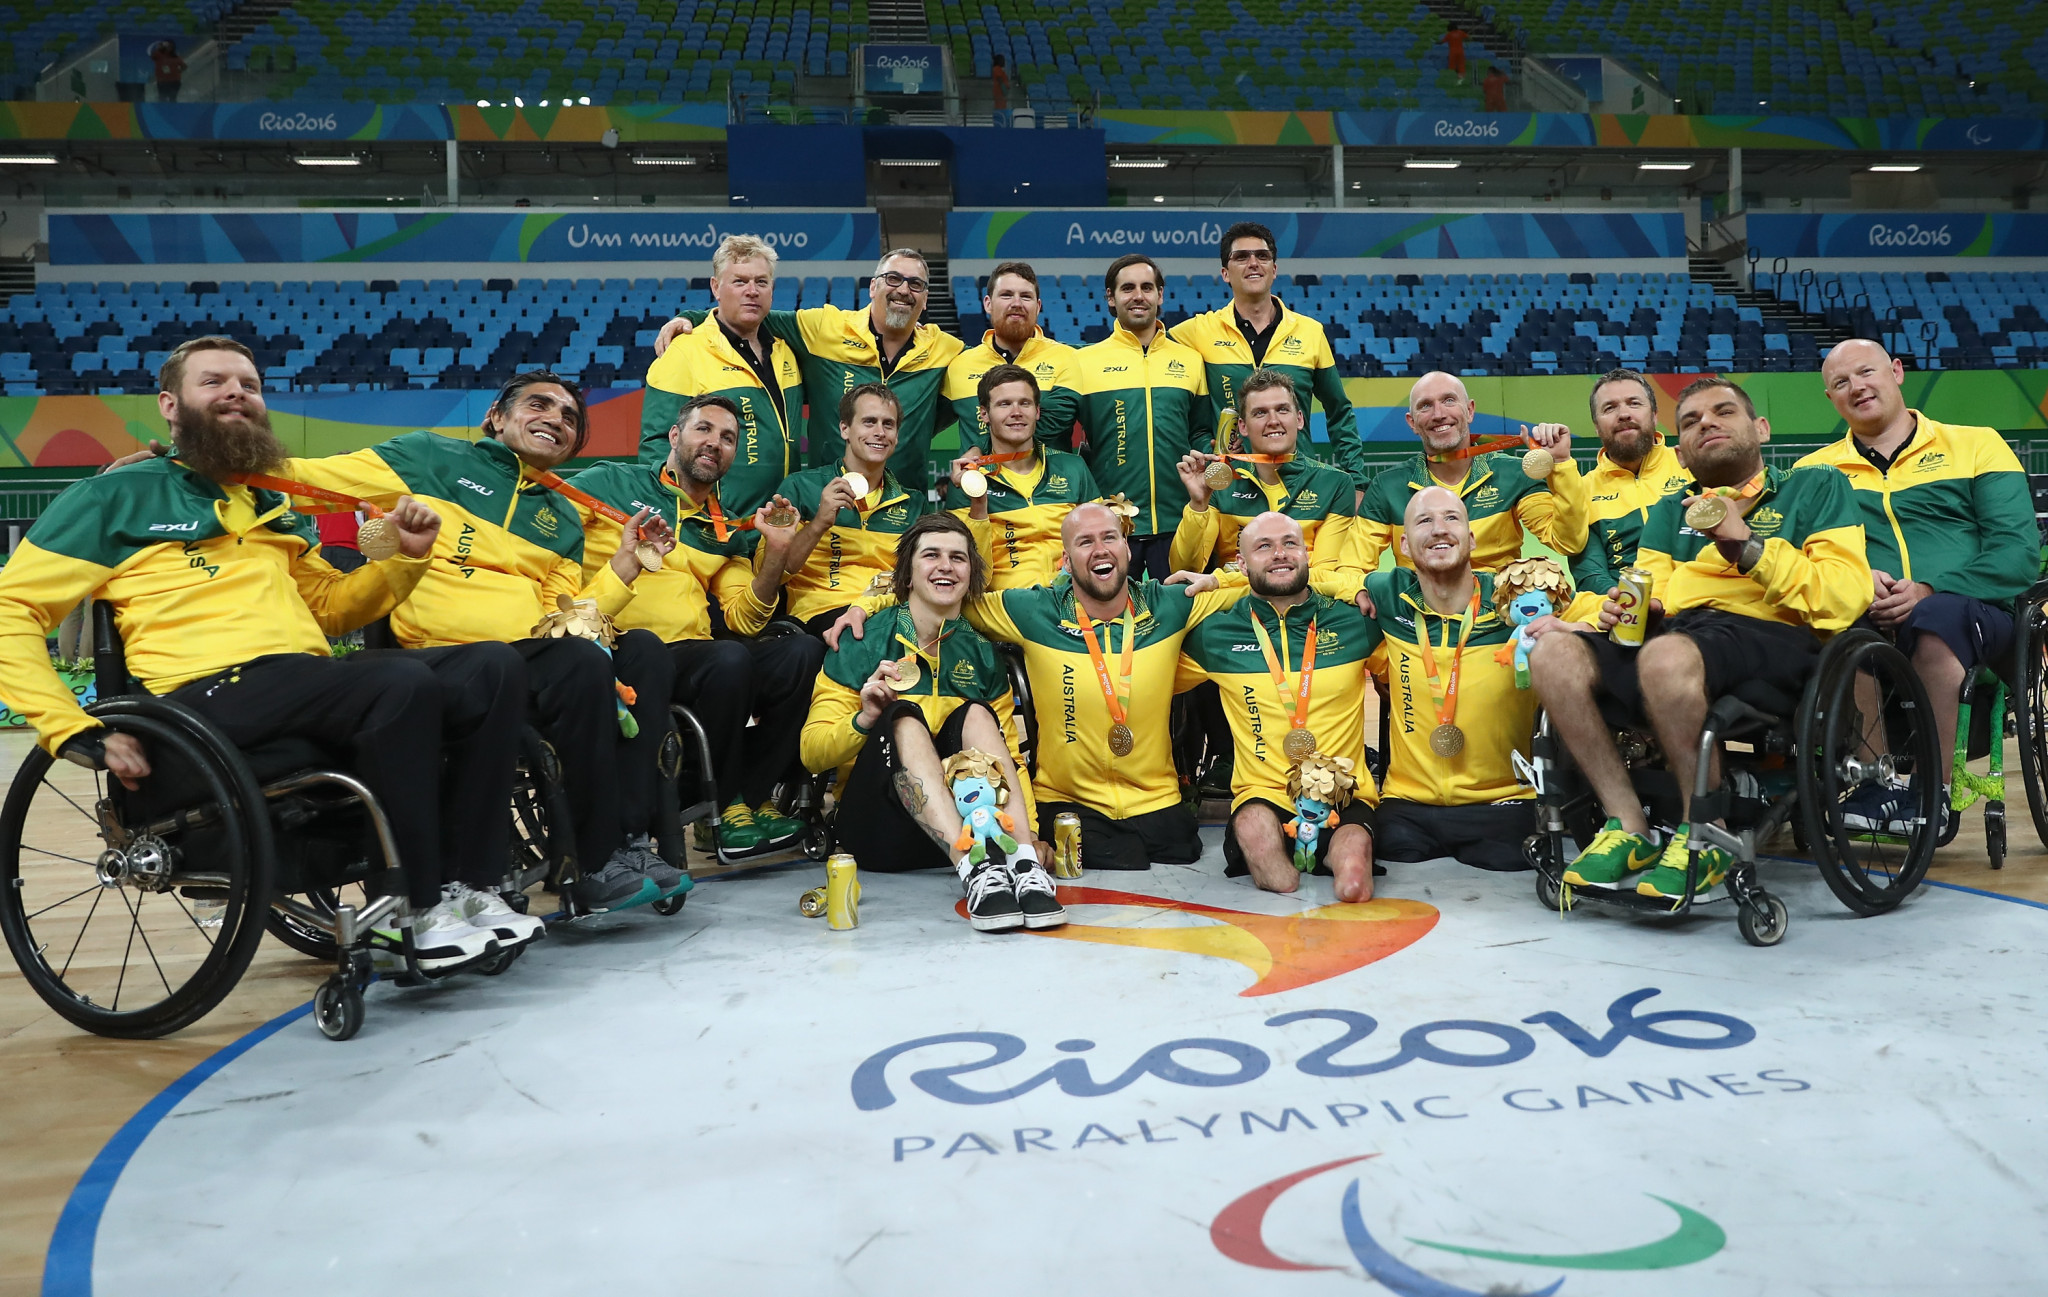 Australia will be chasing a record third consecutive Paralympic Games gold medal in wheelchair rugby at Tokyo 2020, having won at London 2012 and Rio 2016 ©Getty Images